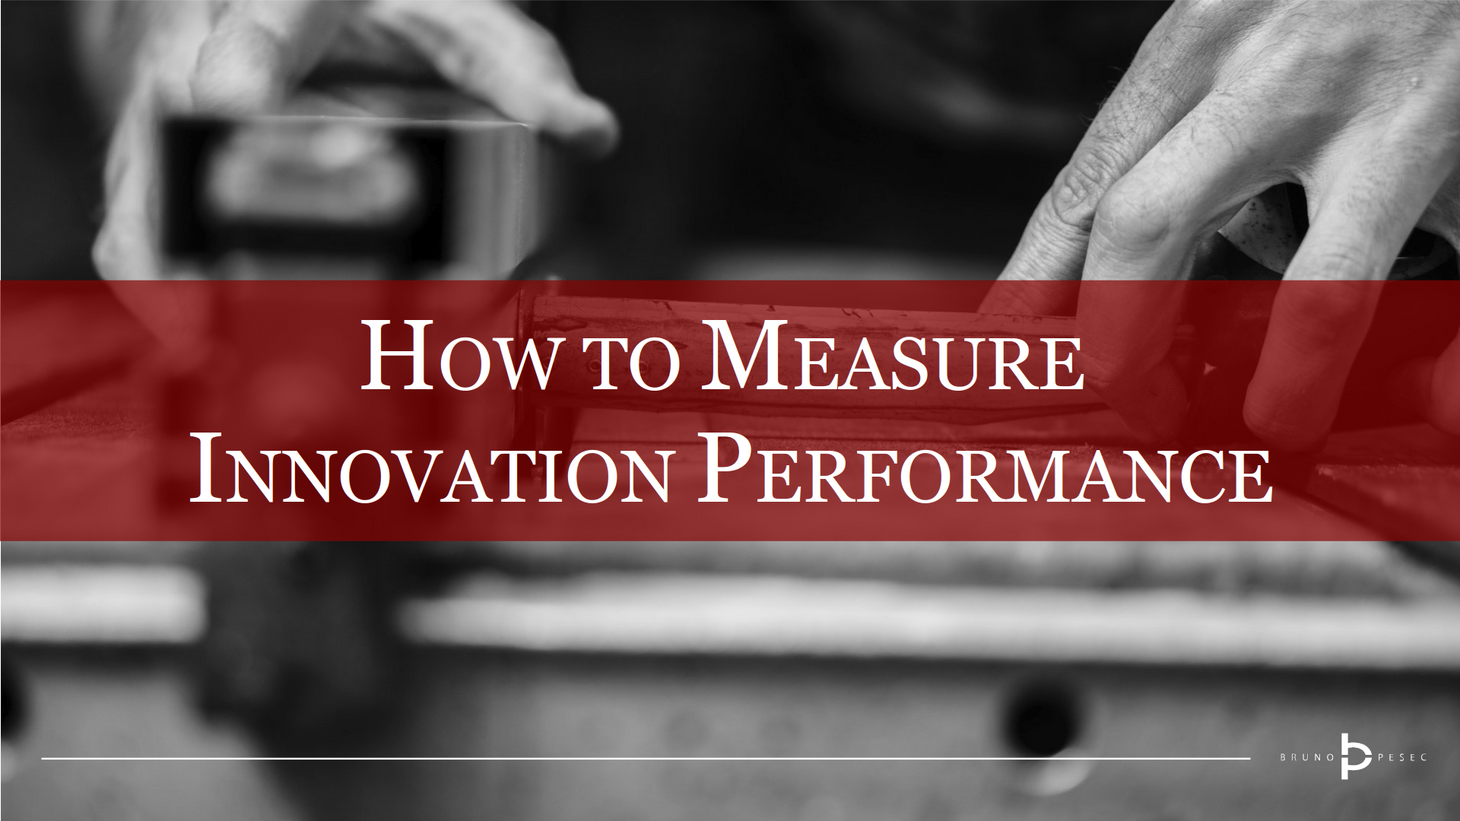 How to measure innovation performance